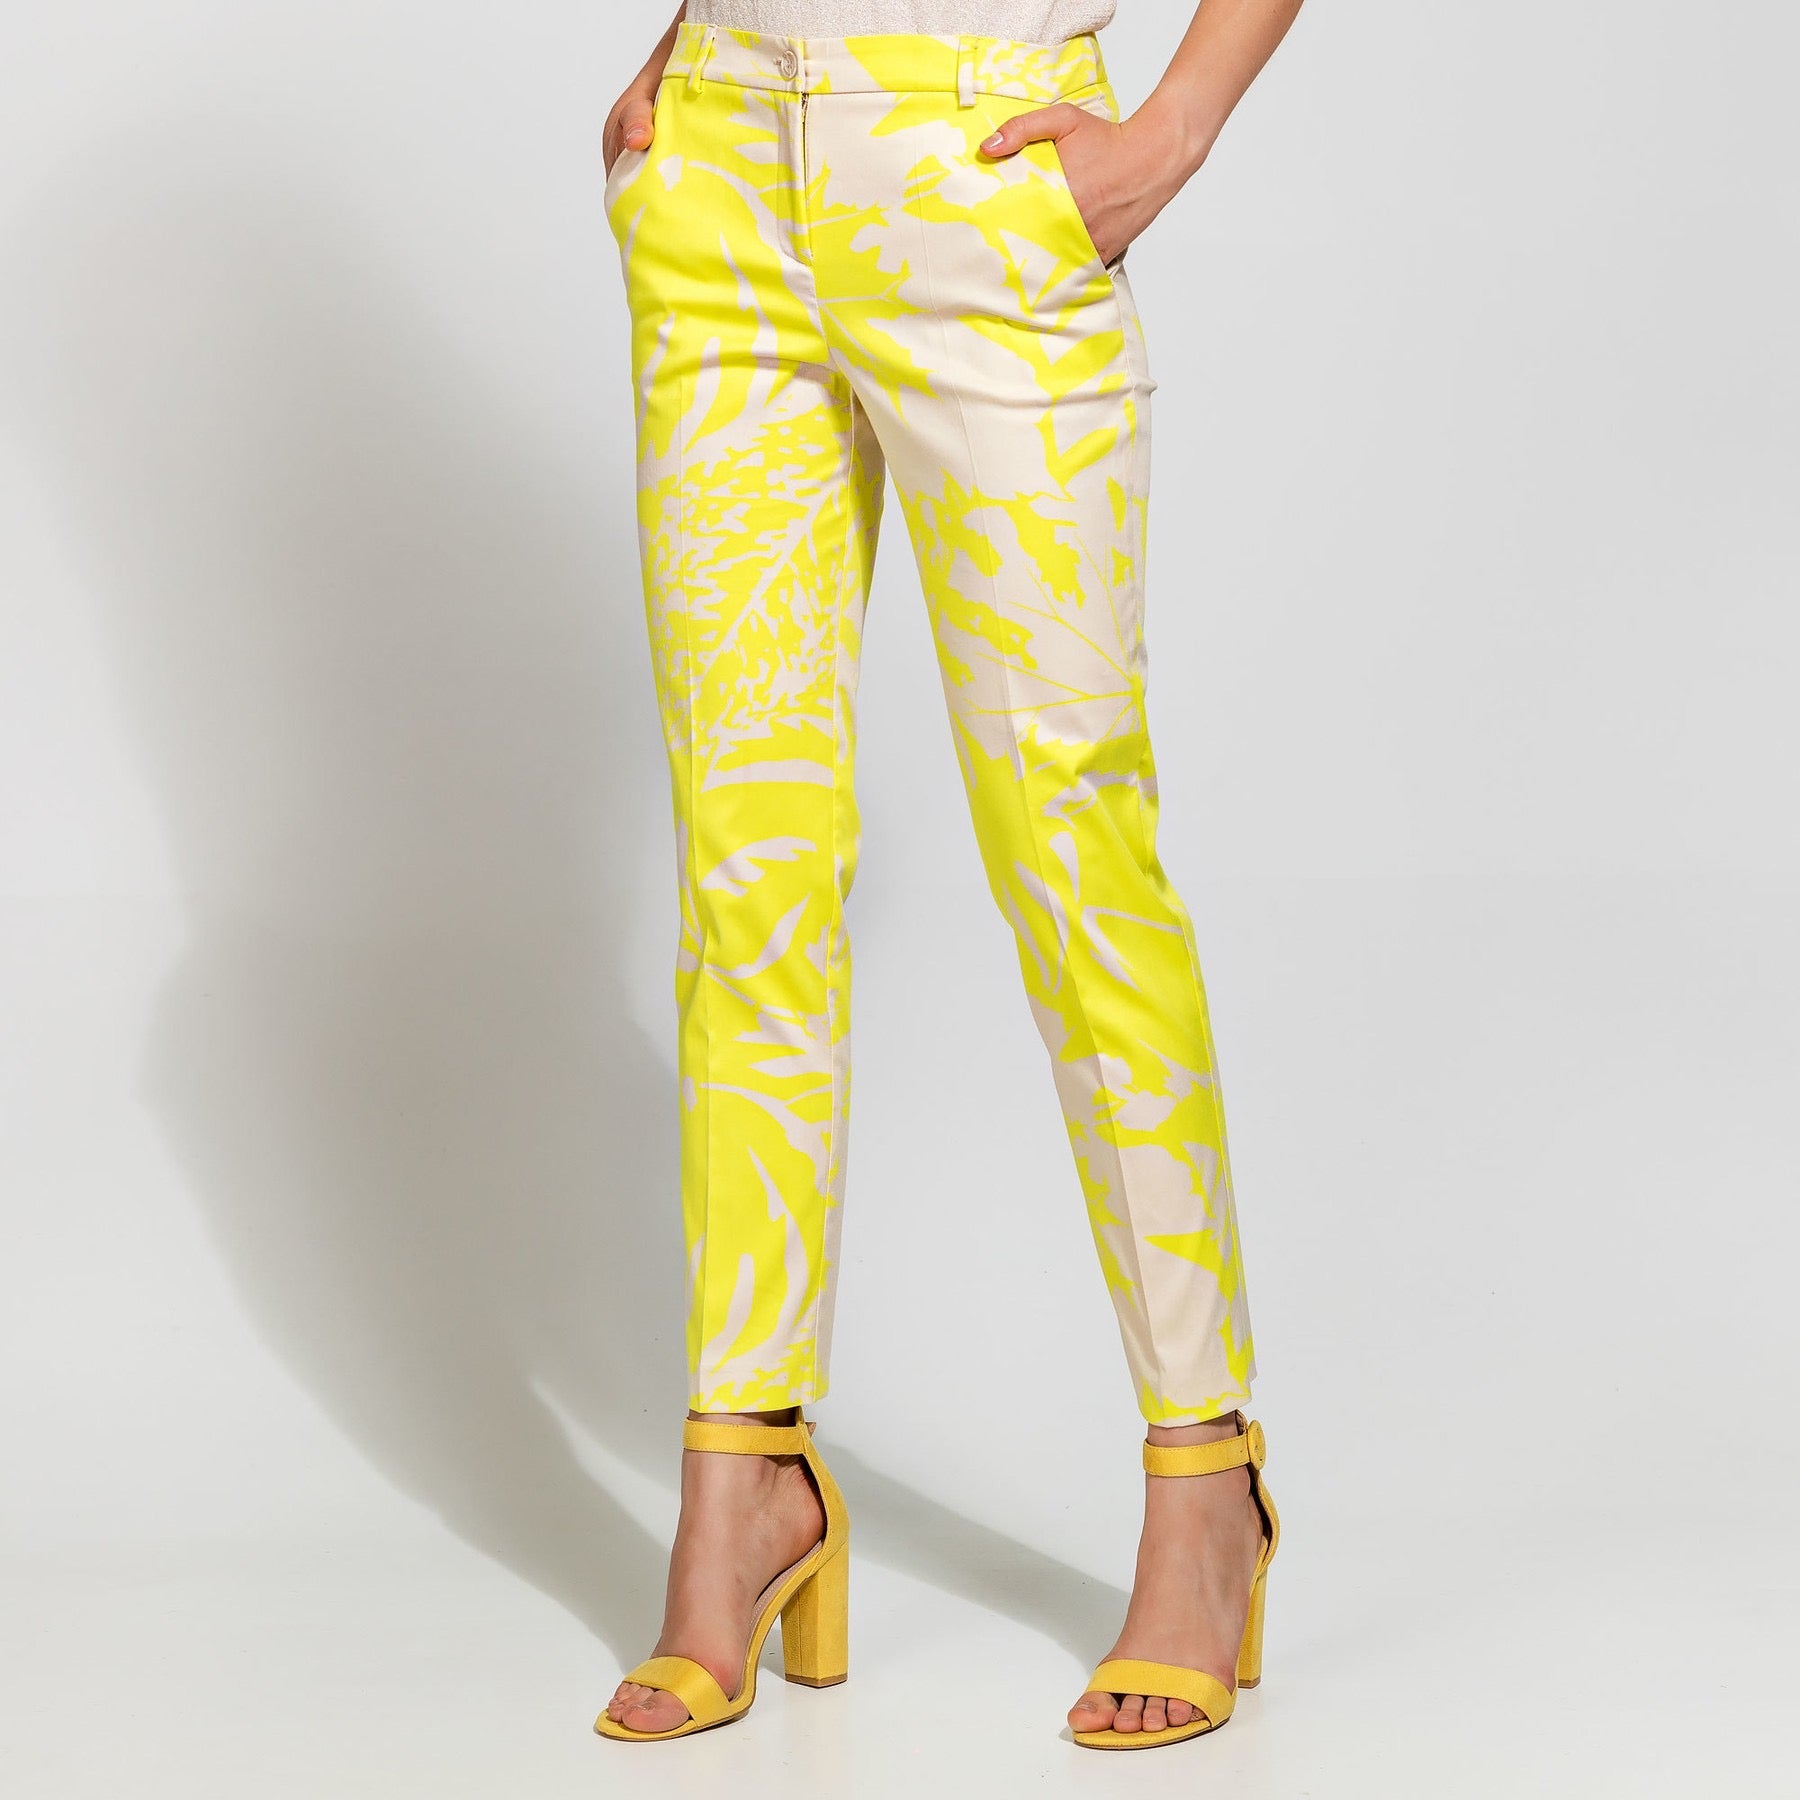 Access Lime cropped pants - Lucindas on-line